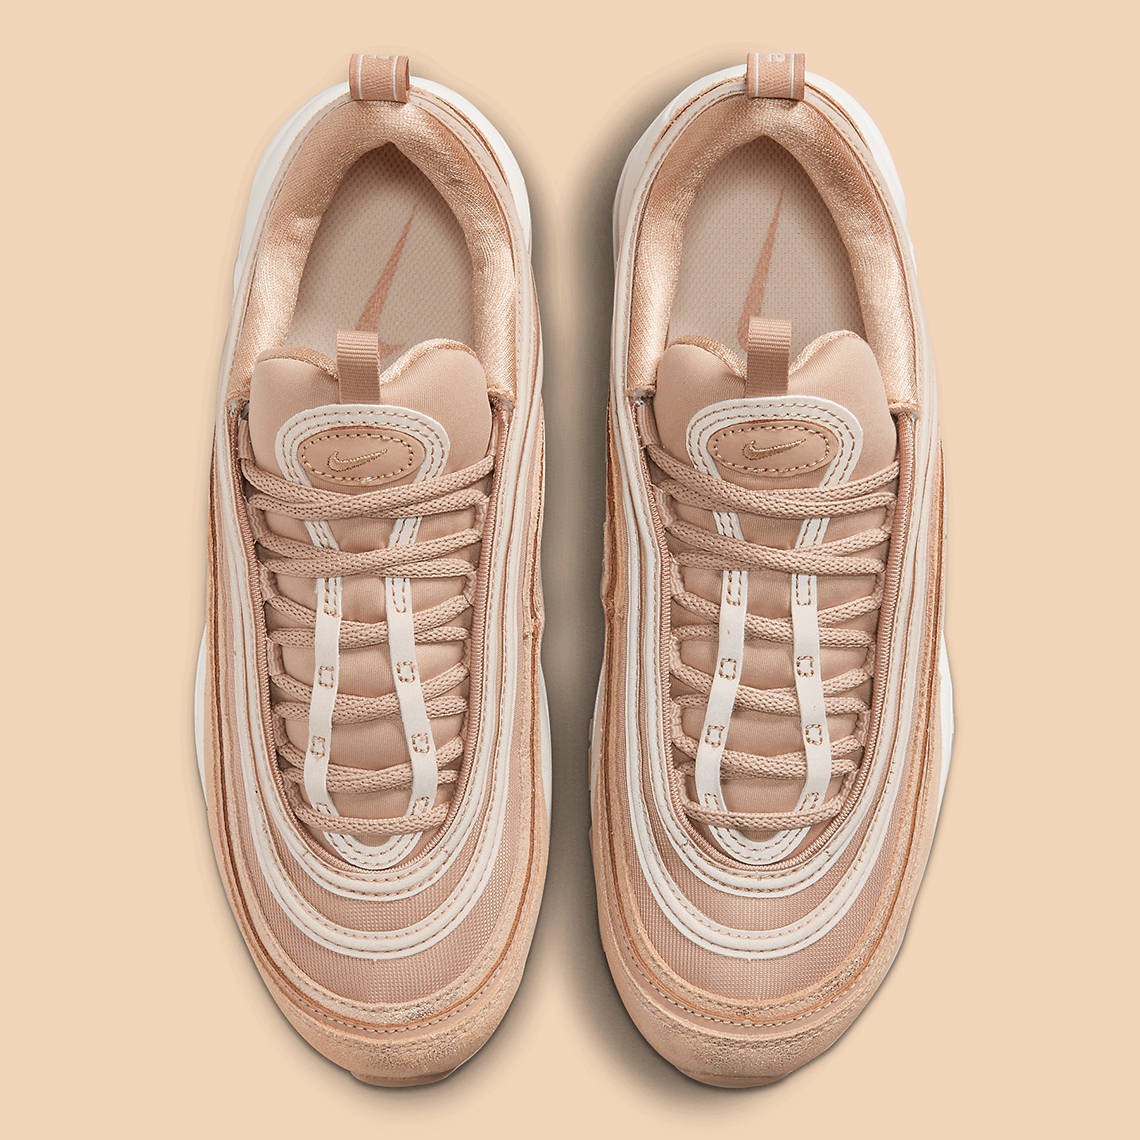 nike-air-max-97-womens-distressed-gold-release-date-5.jpg